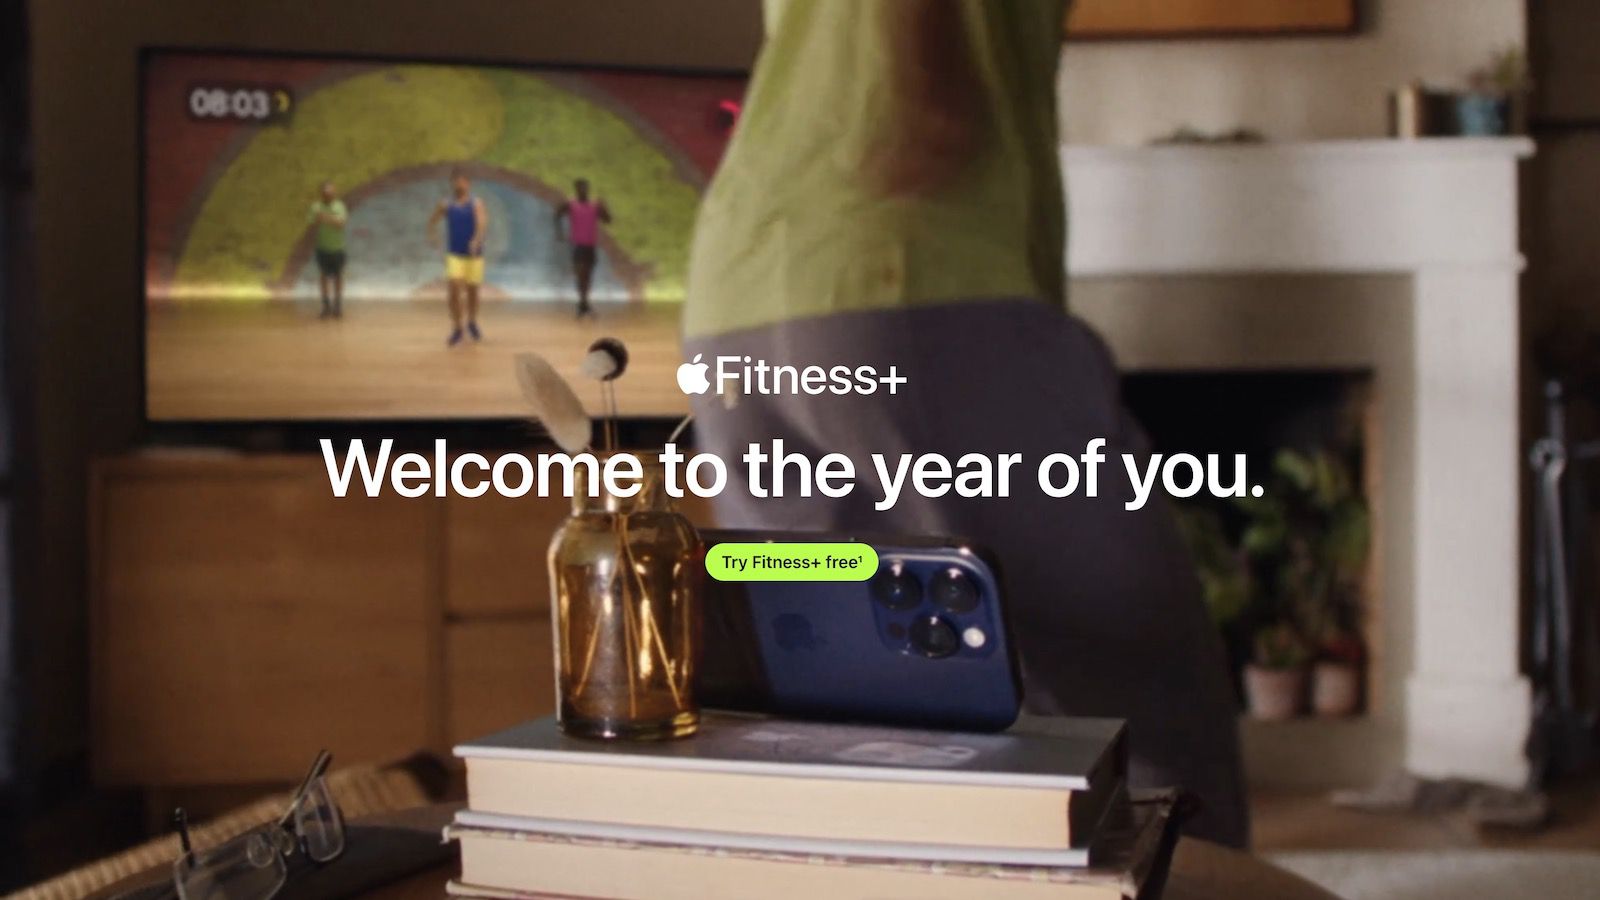 Apple Fitness+: The next era of fitness is here, and everyone's